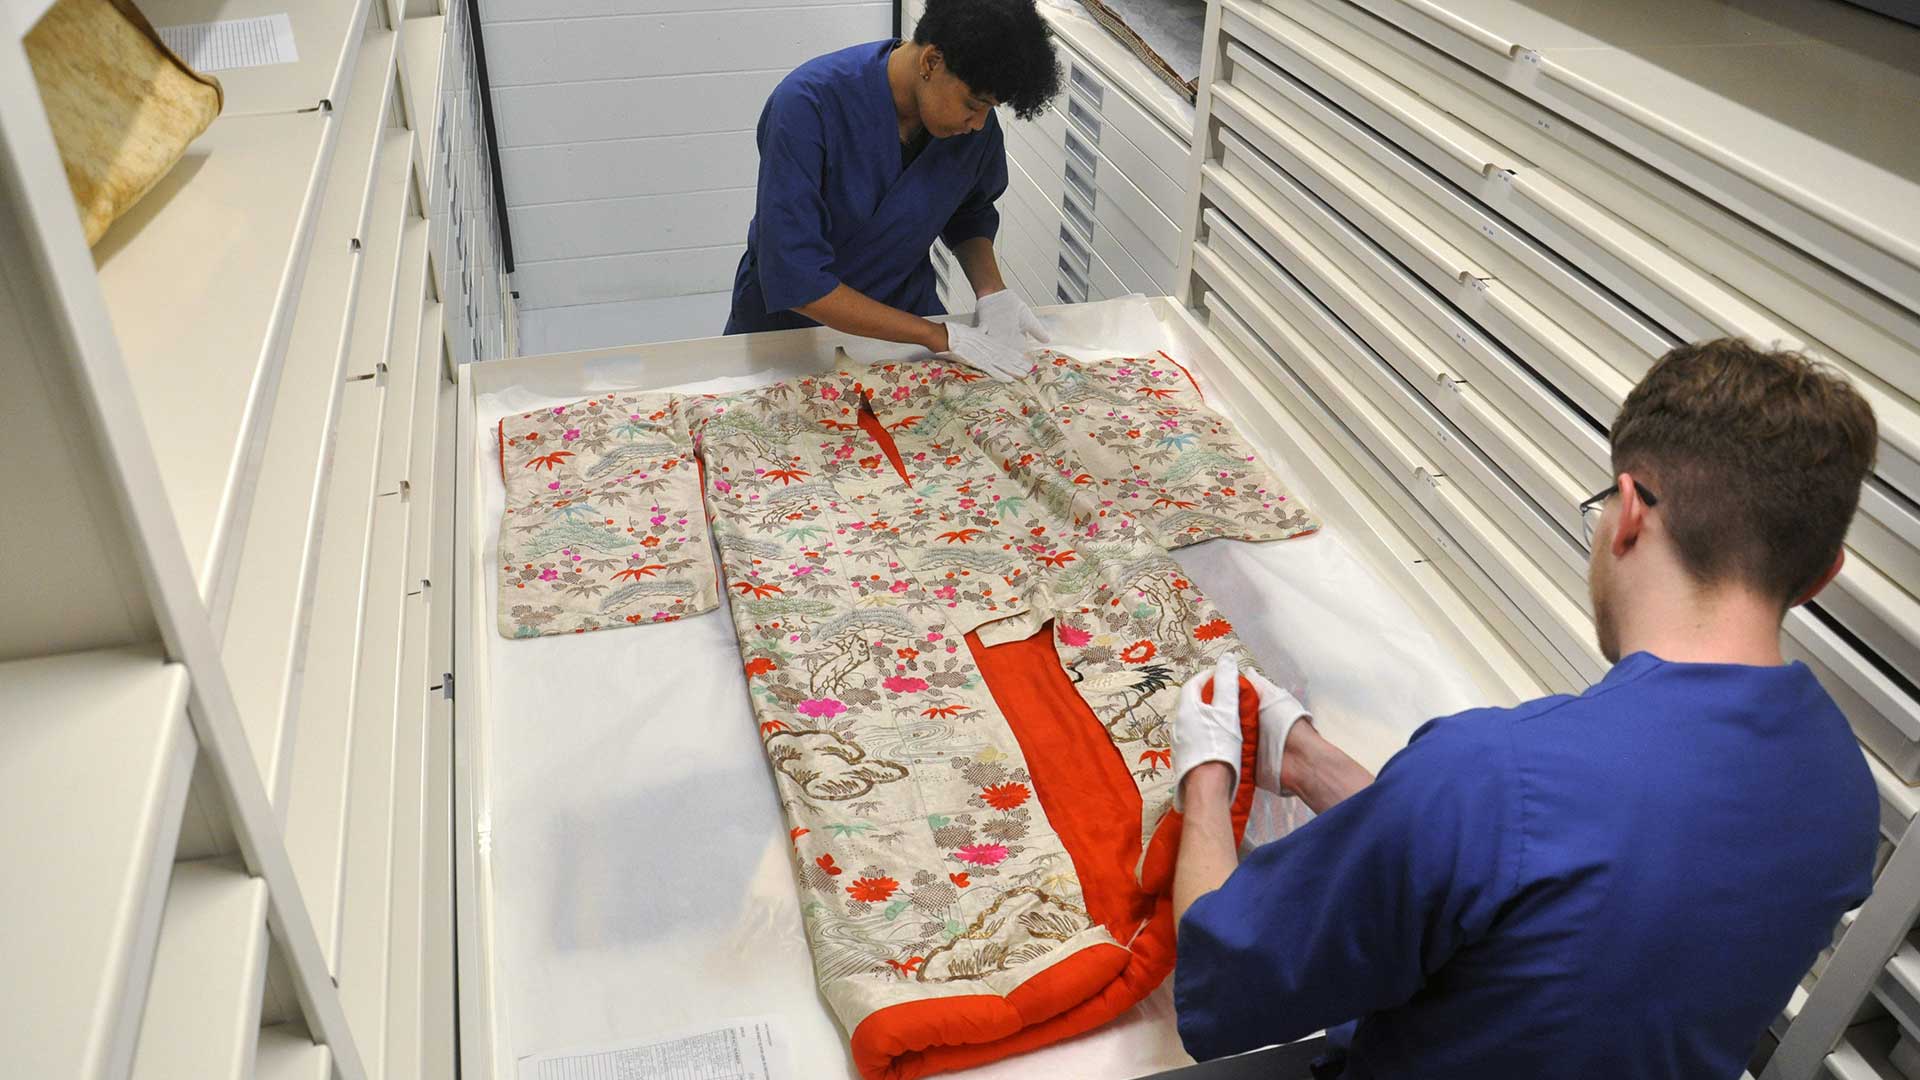 Kyndal and another student arrange a kimono in a storage drawer